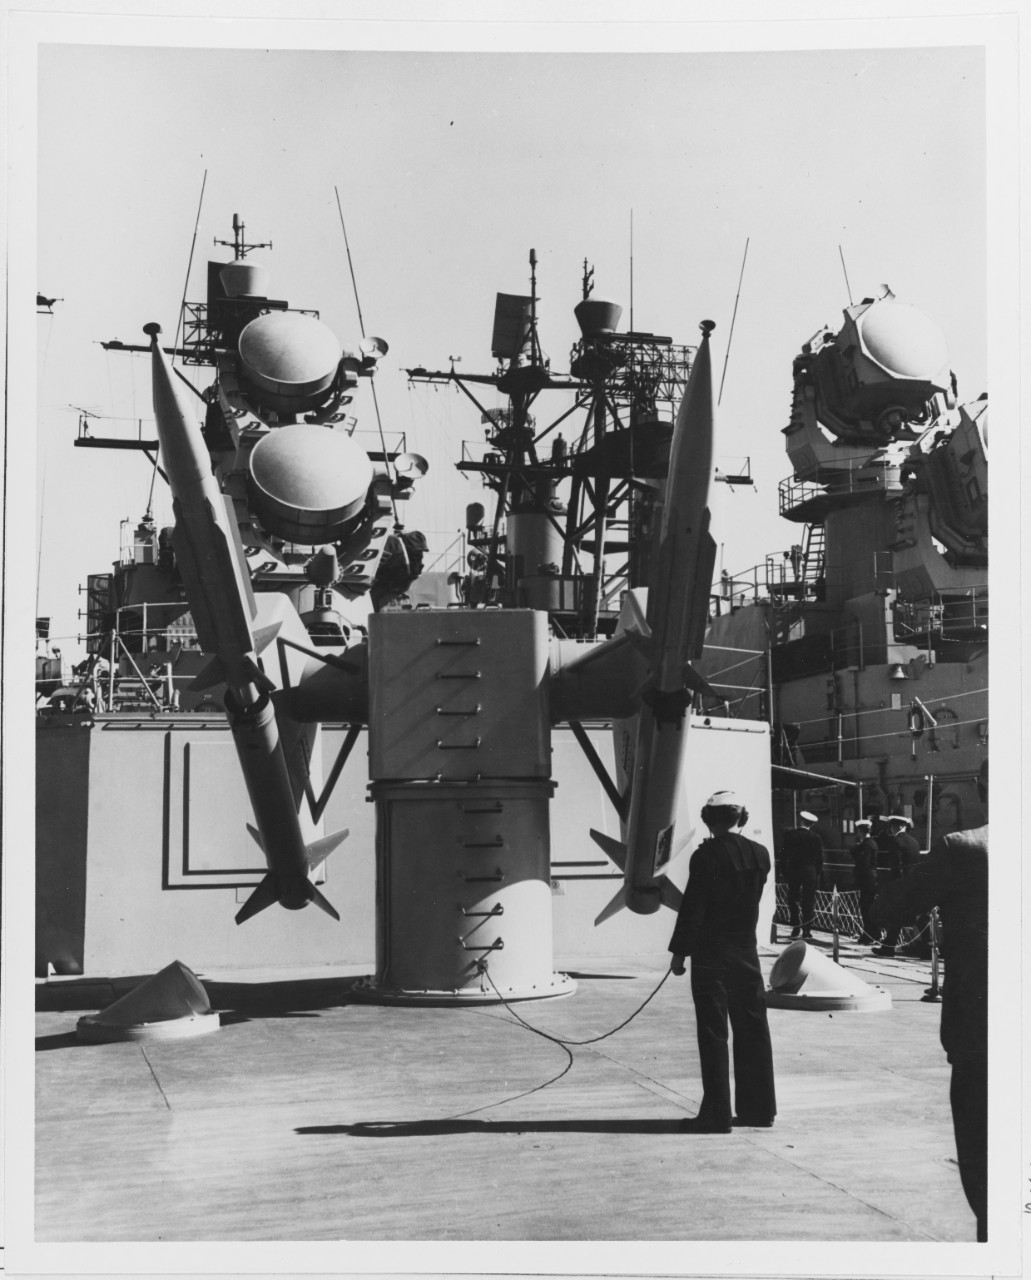 Terrier Missile aboard DLG's tied up at San Diego Harbor, California.  5/19/1961